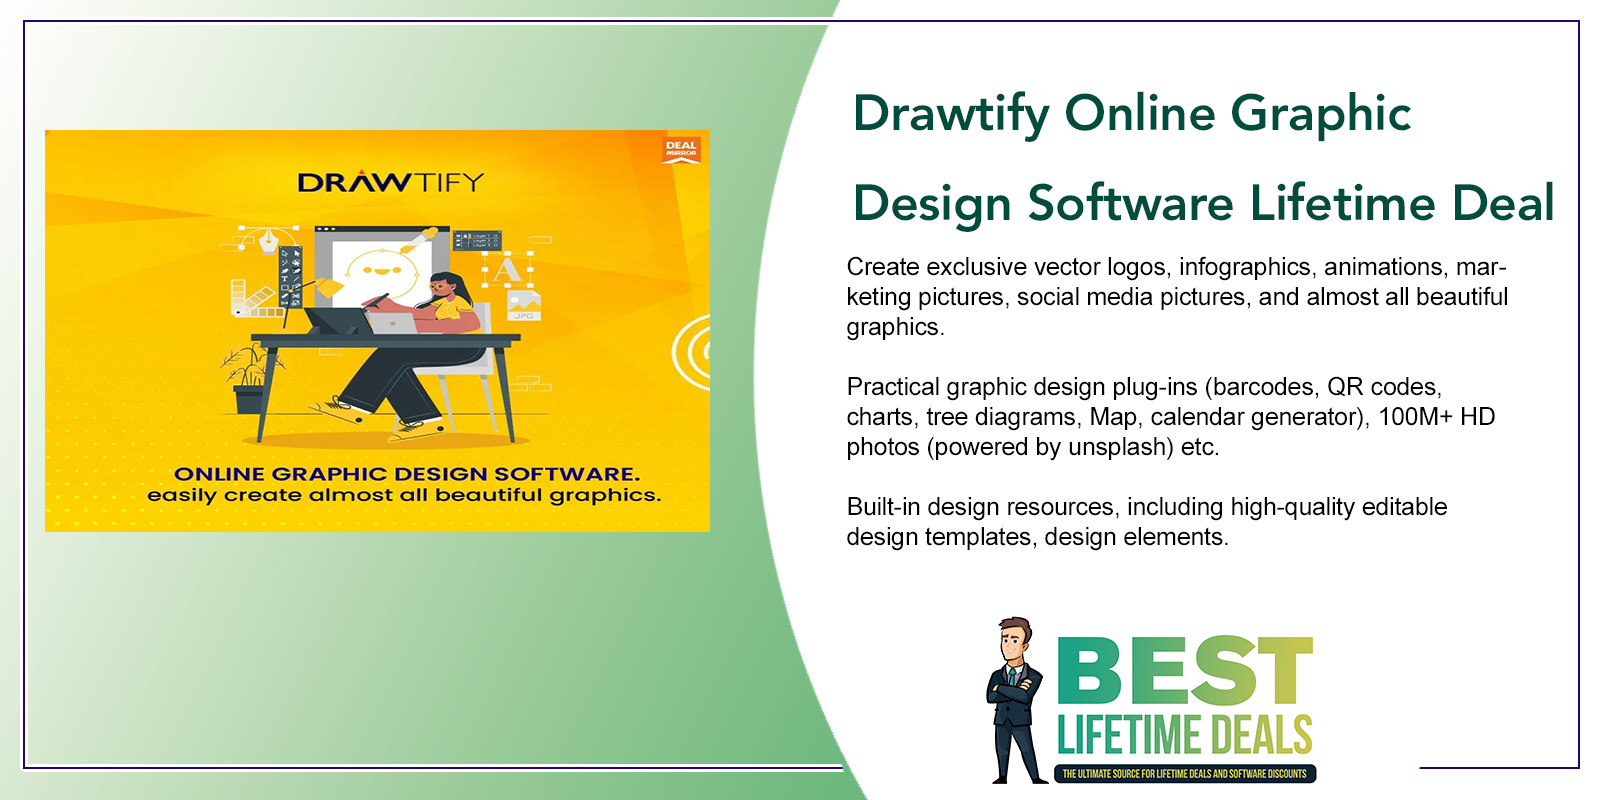 Drawtify Online Graphic Design Software Lifetime Deal Featured Image